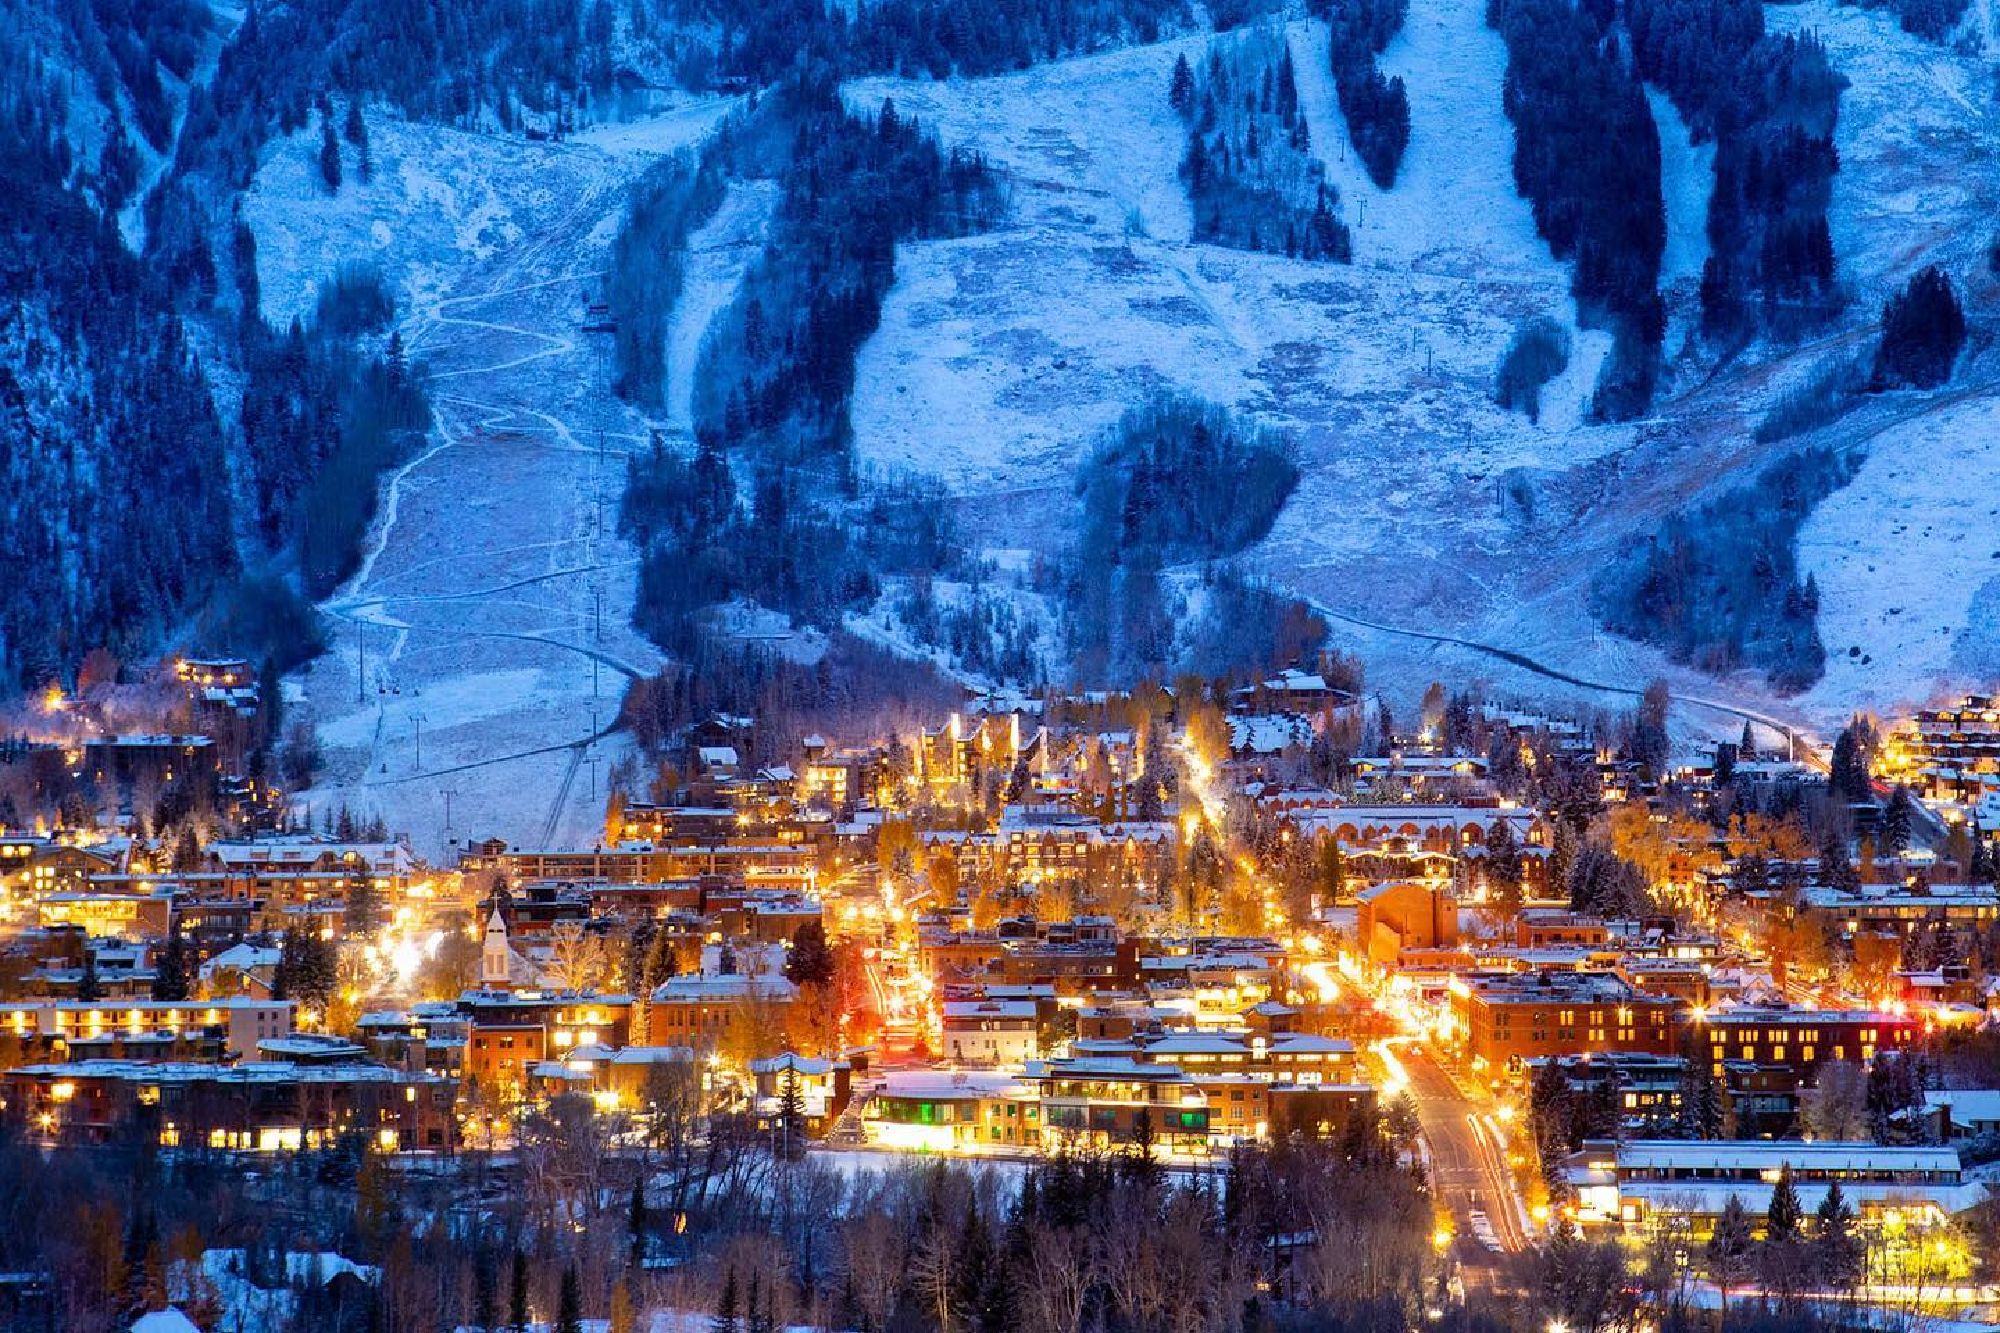 City Cheat Sheet: A Travel Guide for Aspen, Colorado - The Scout Guide